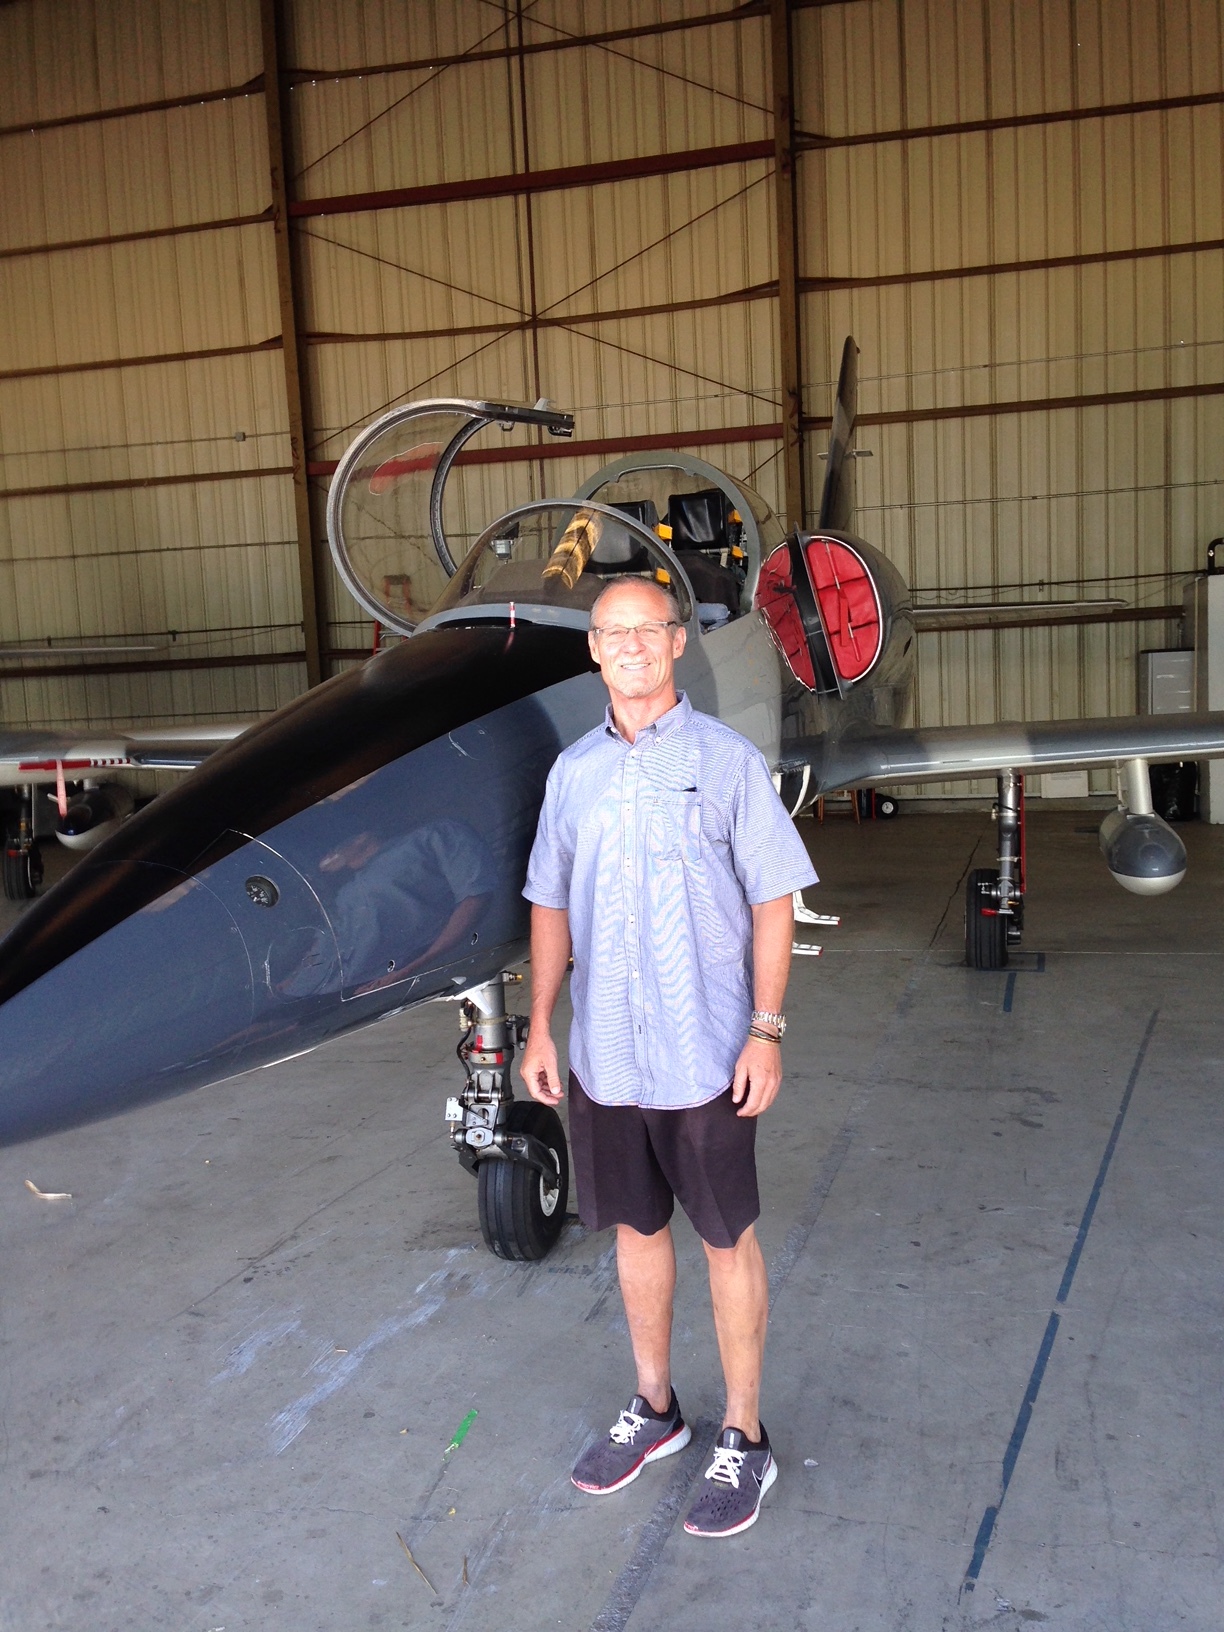 Burbank, CA with a friend and his Russian-made jet